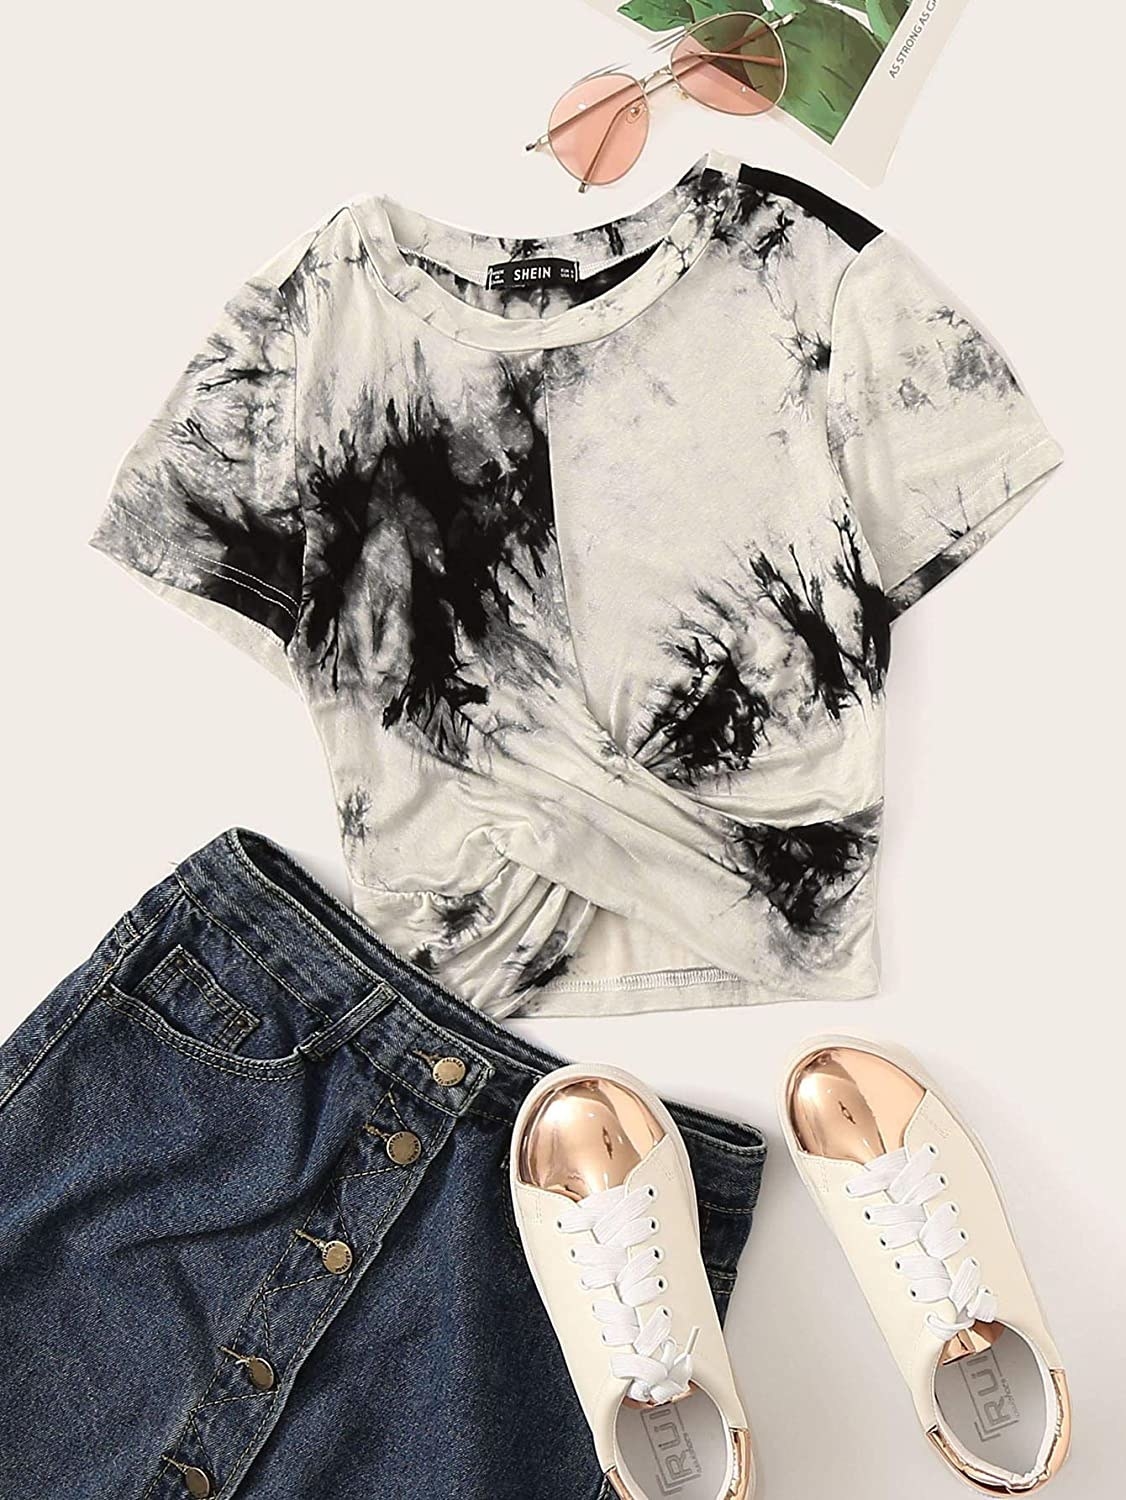 the gray, white, and black tie dye tee